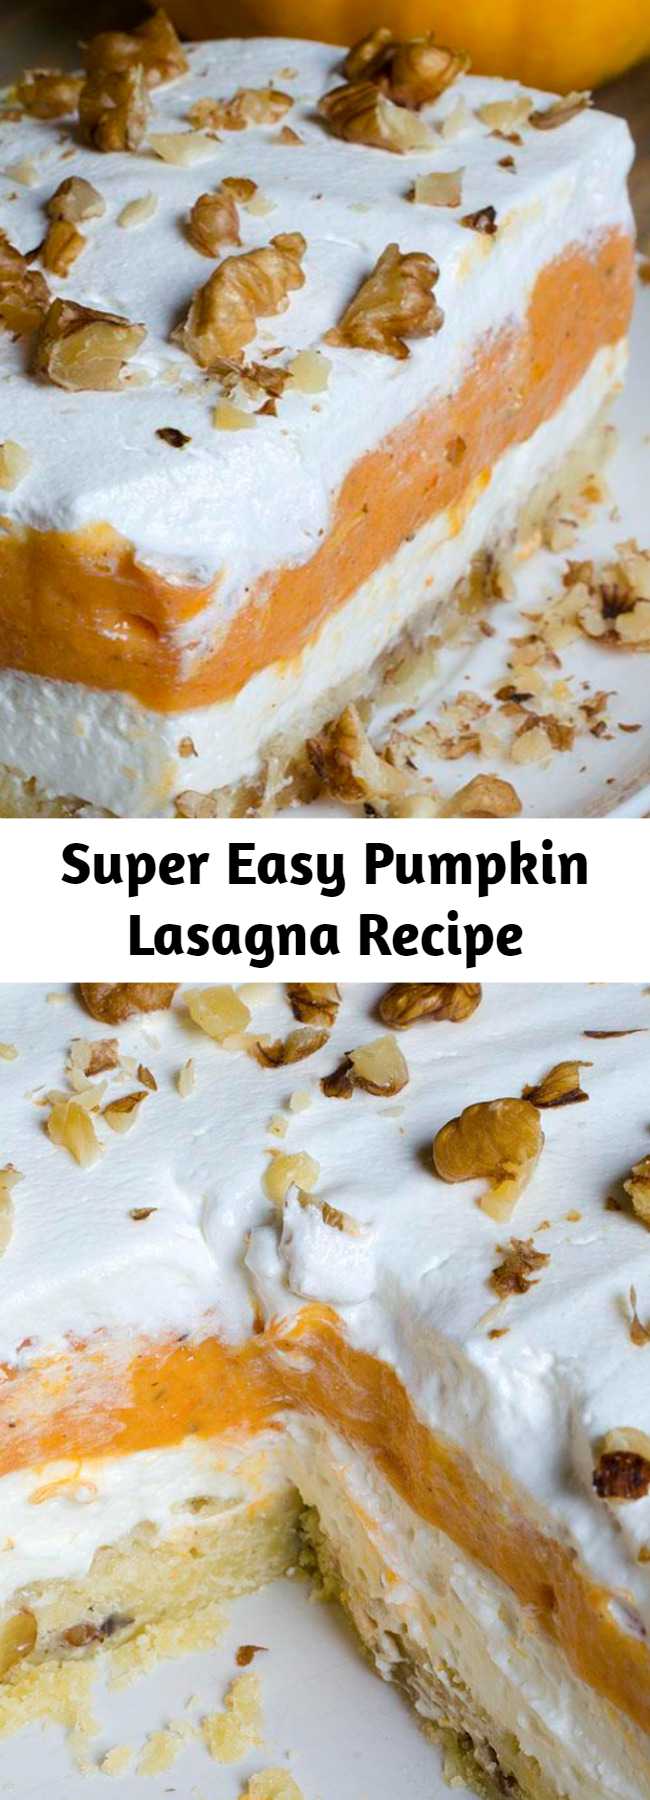 Super Easy Pumpkin Lasagna Recipe - This awesome Pumpkin Lasagna recipe has layers of moist pumpkin cake, creamy cheesecake and a crunchy crust. It’s a delicious dessert recipe that’s super fun to make and perfect for the fall! #pumpkin #lasagna #desserts